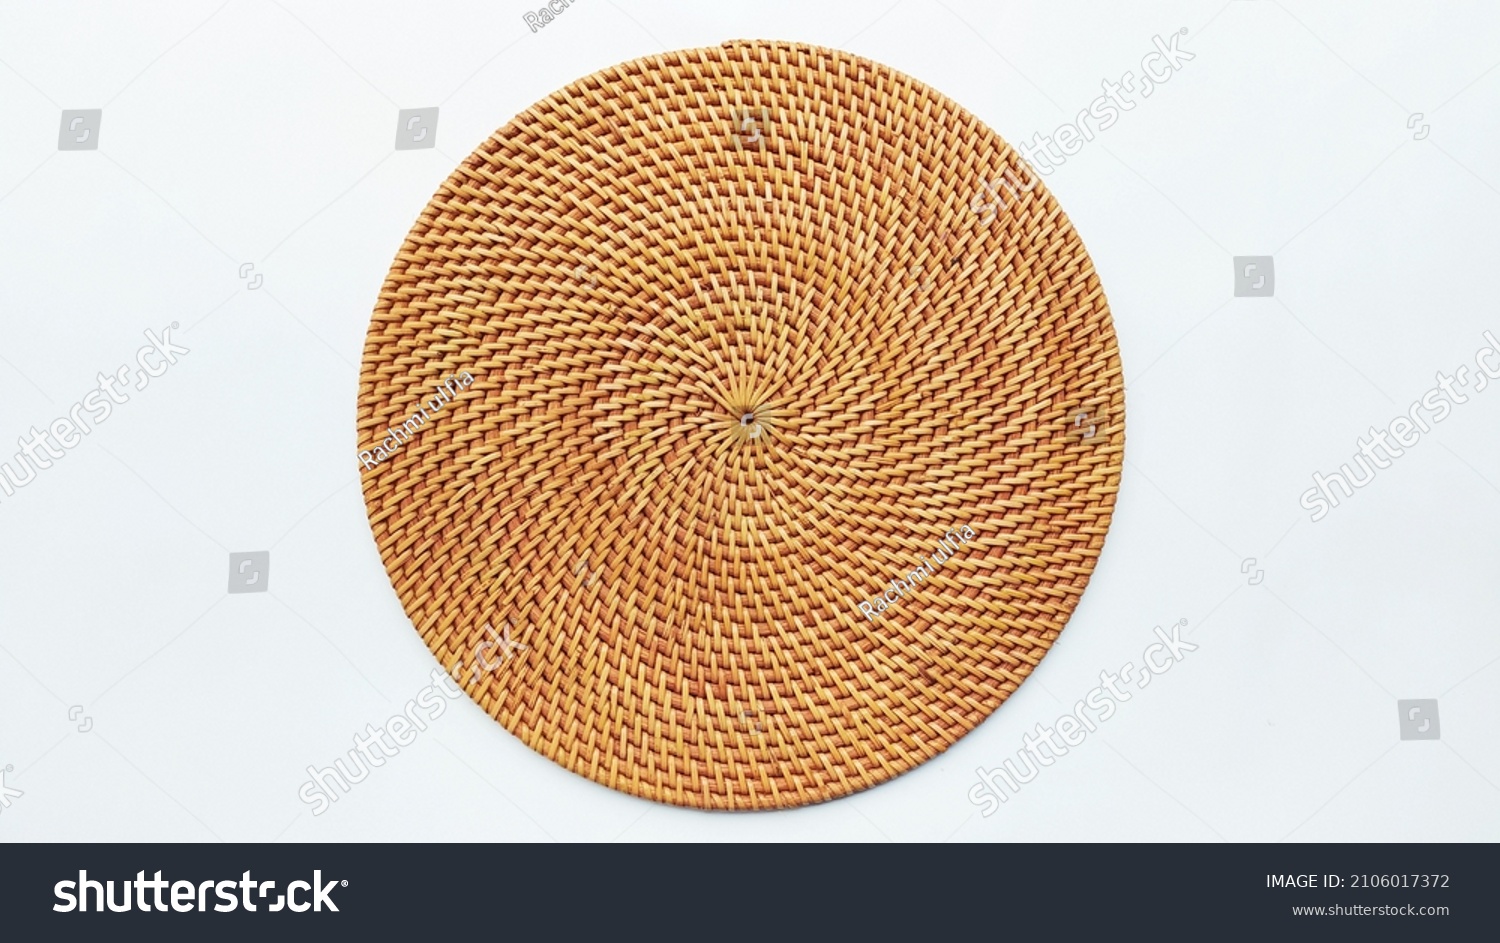 Rattan Round woven Placemat place on a white background. View from above #2106017372